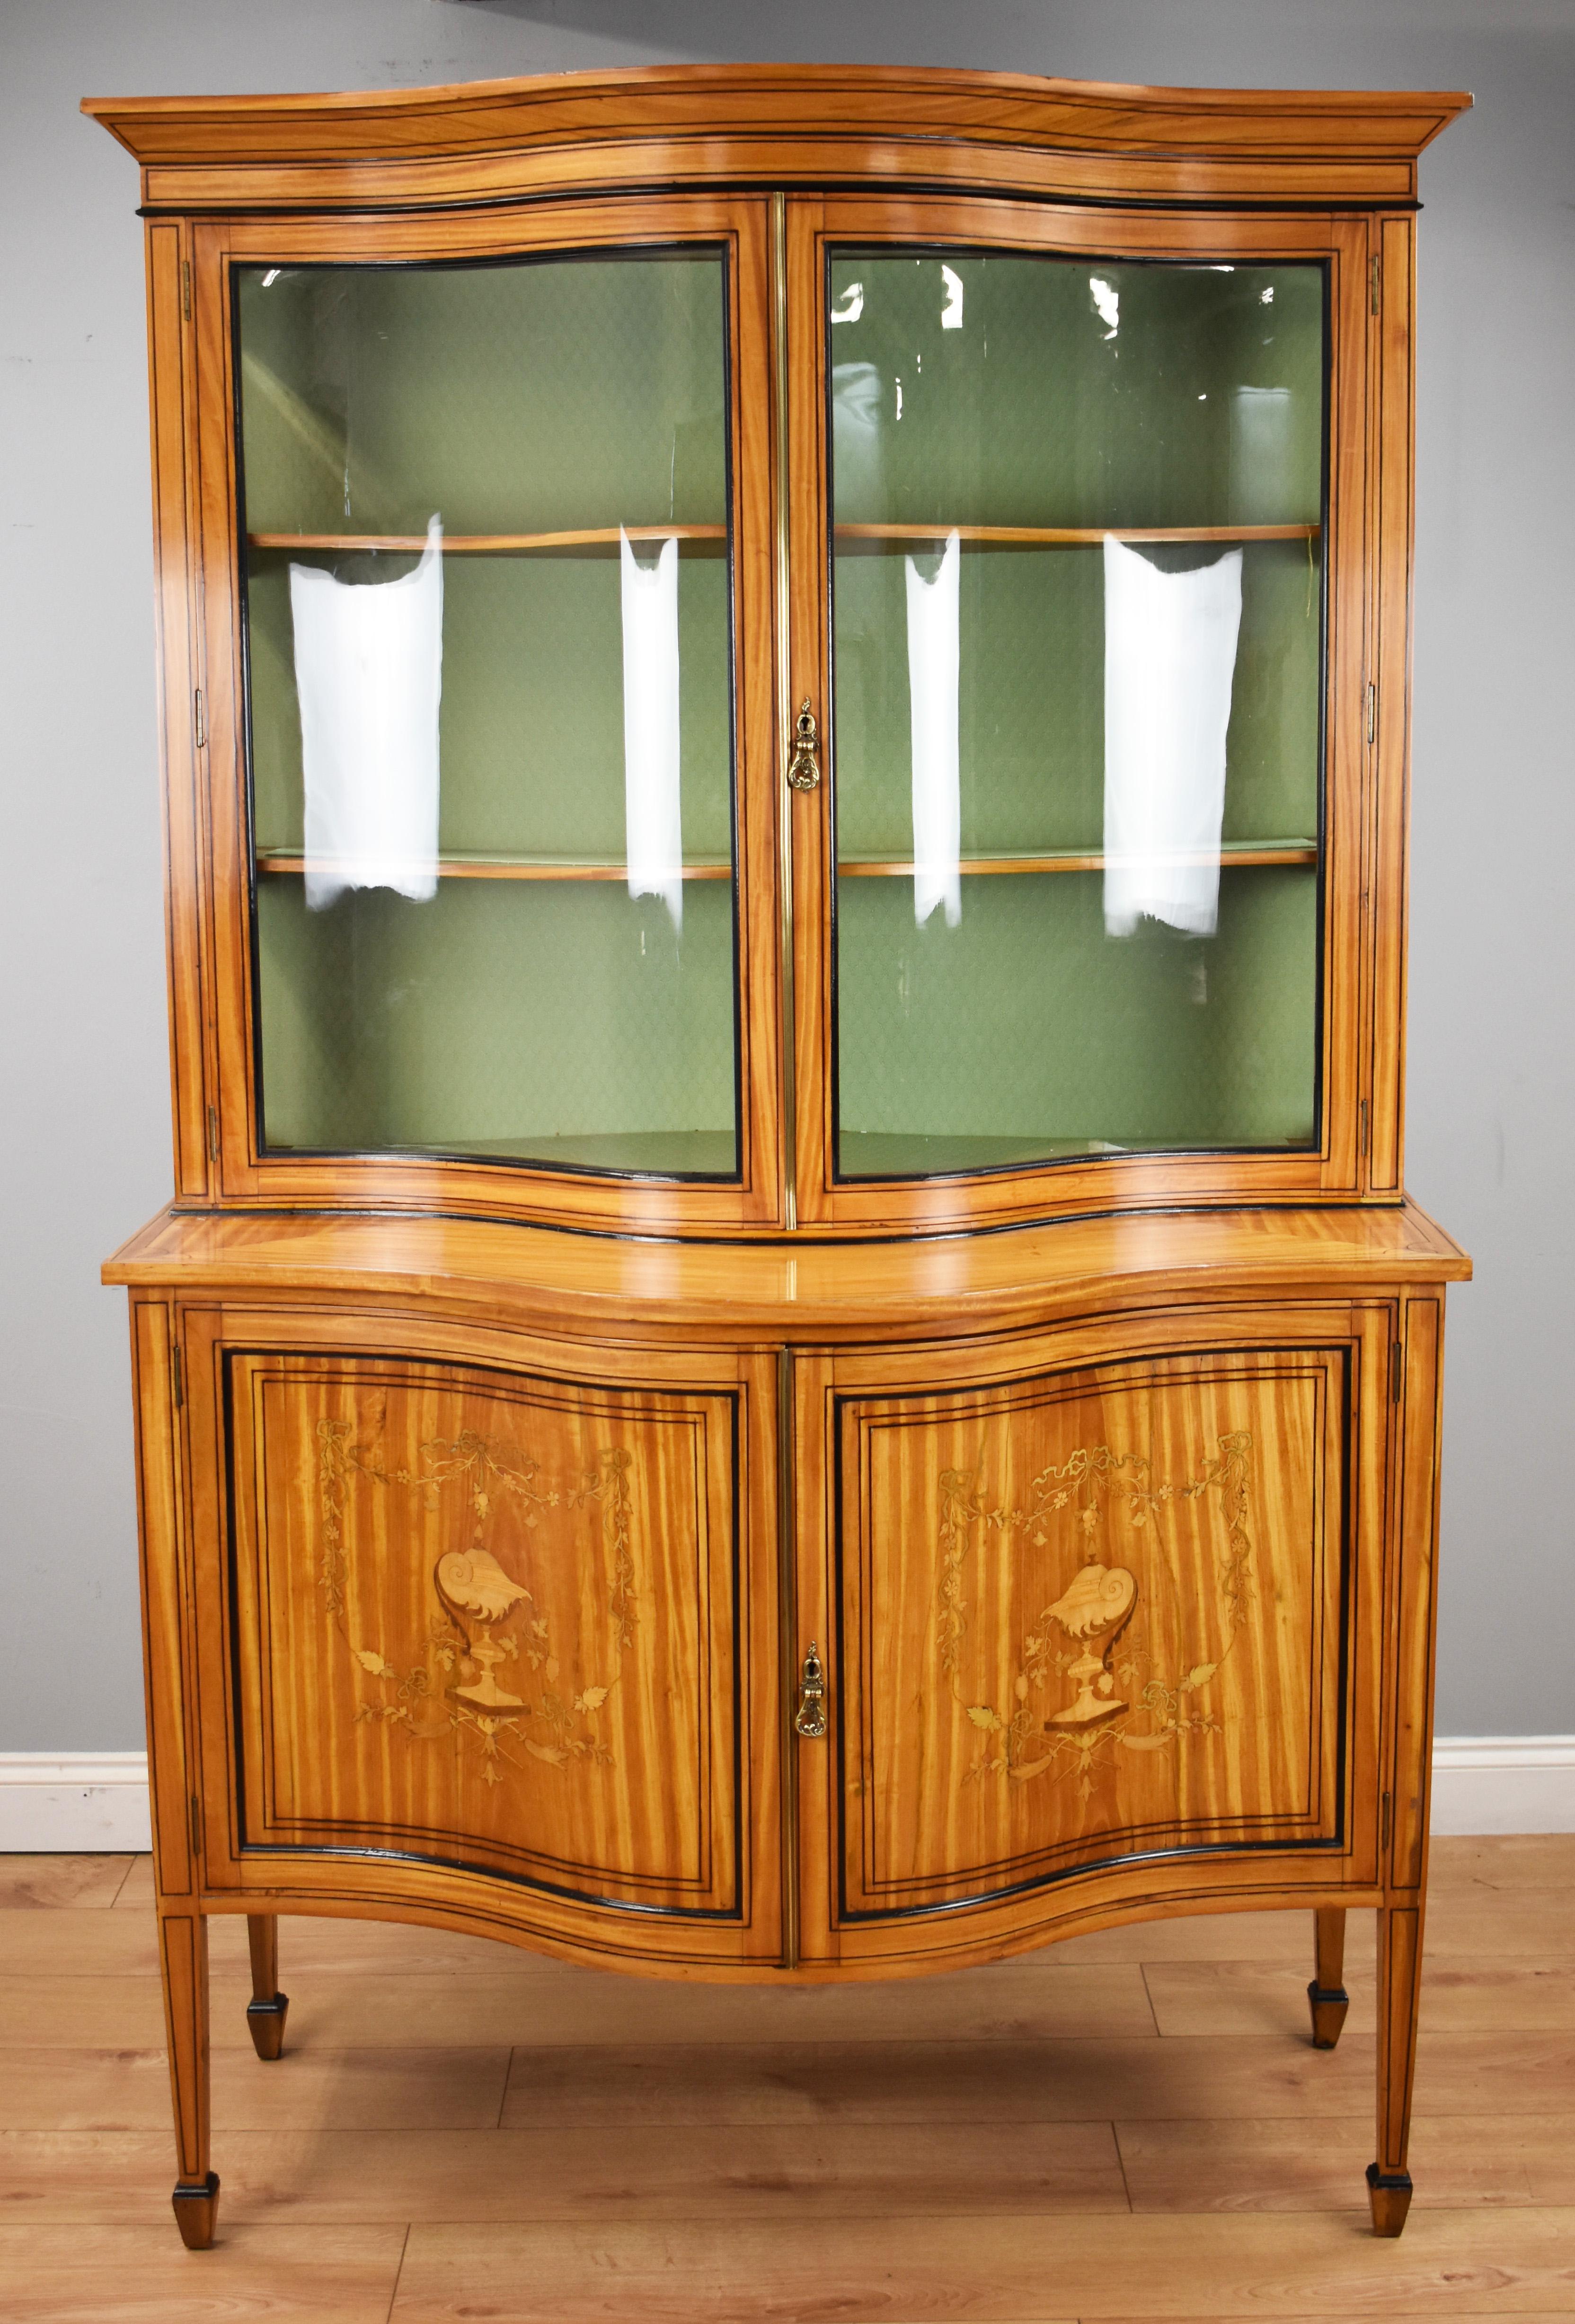 For sale is a fine 19th century satinwood serpentine display cabinet, inlaid with ebony stringing and edged with ebonized moulding, the upper section has a moulded cornice above to glazed doors opening to shelves. The base section, with well swept